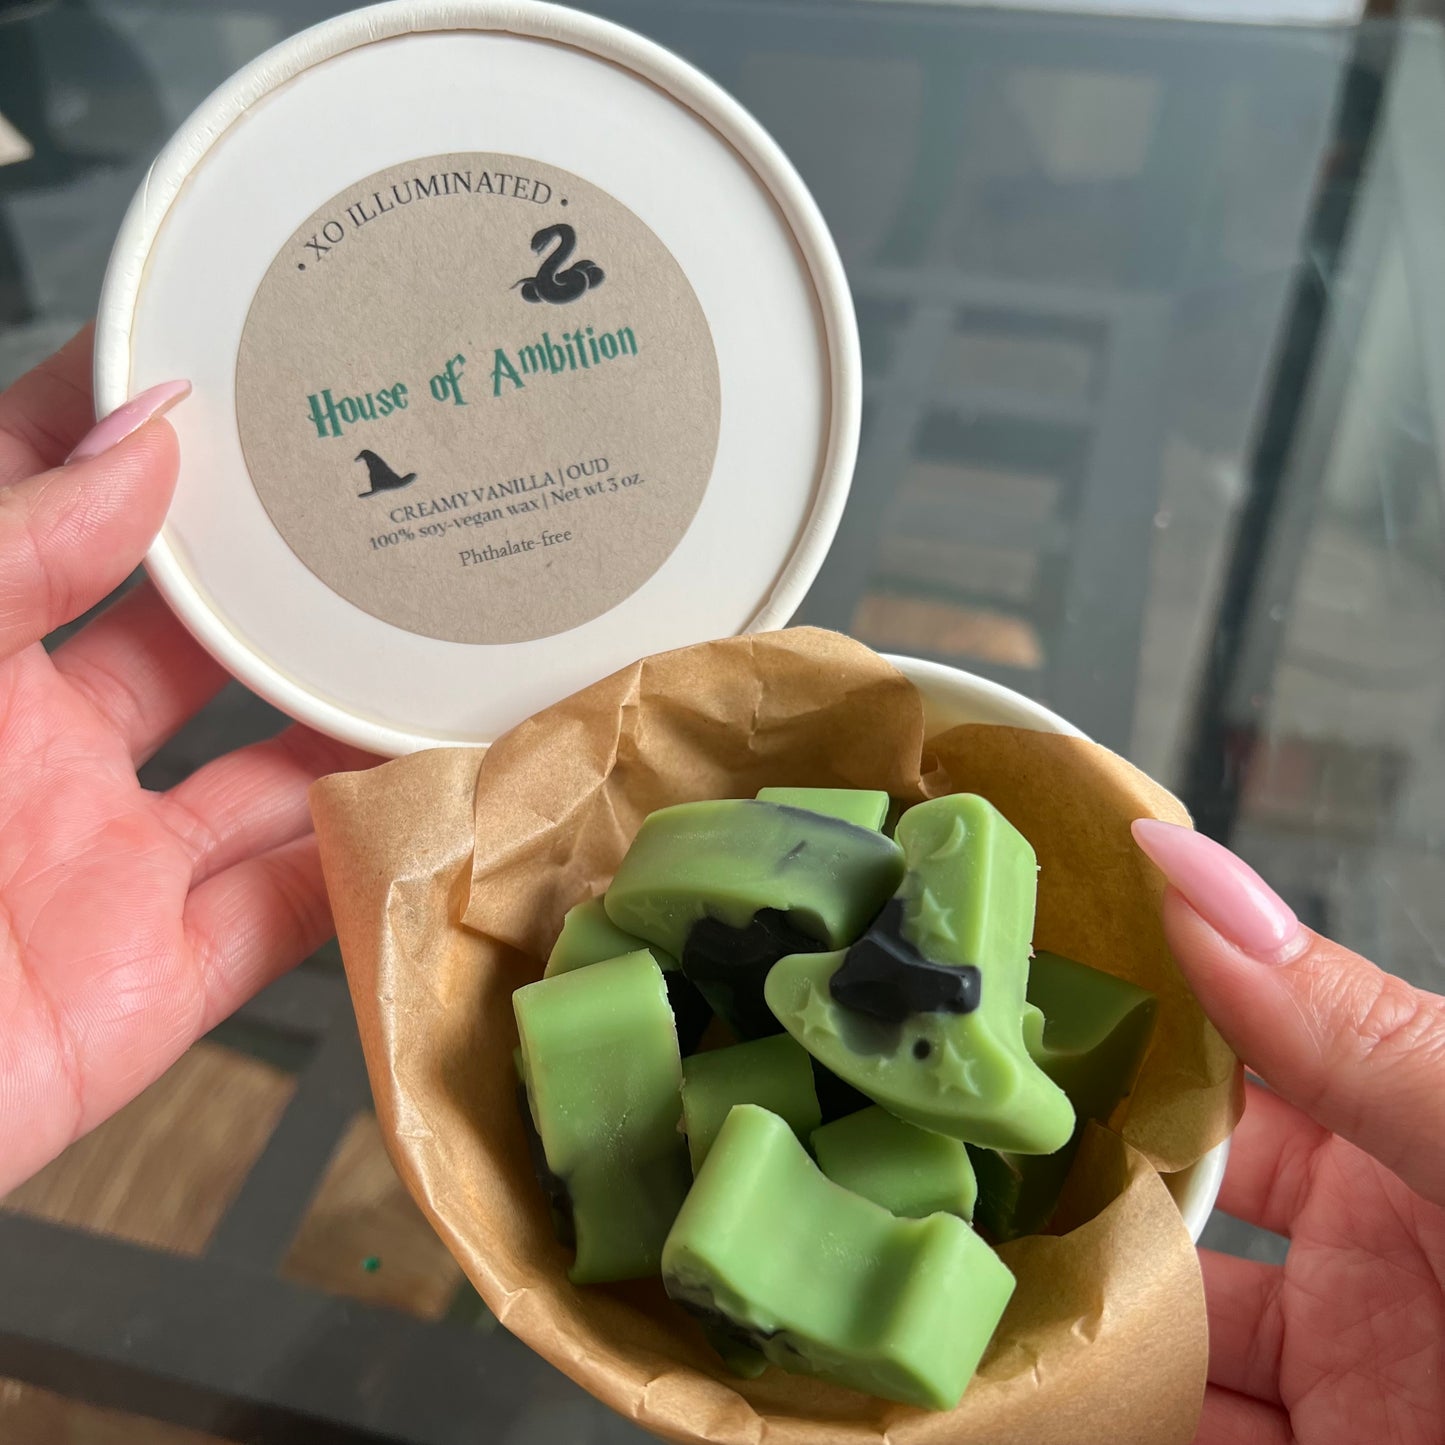 House of Ambition - Slytherin wax melts